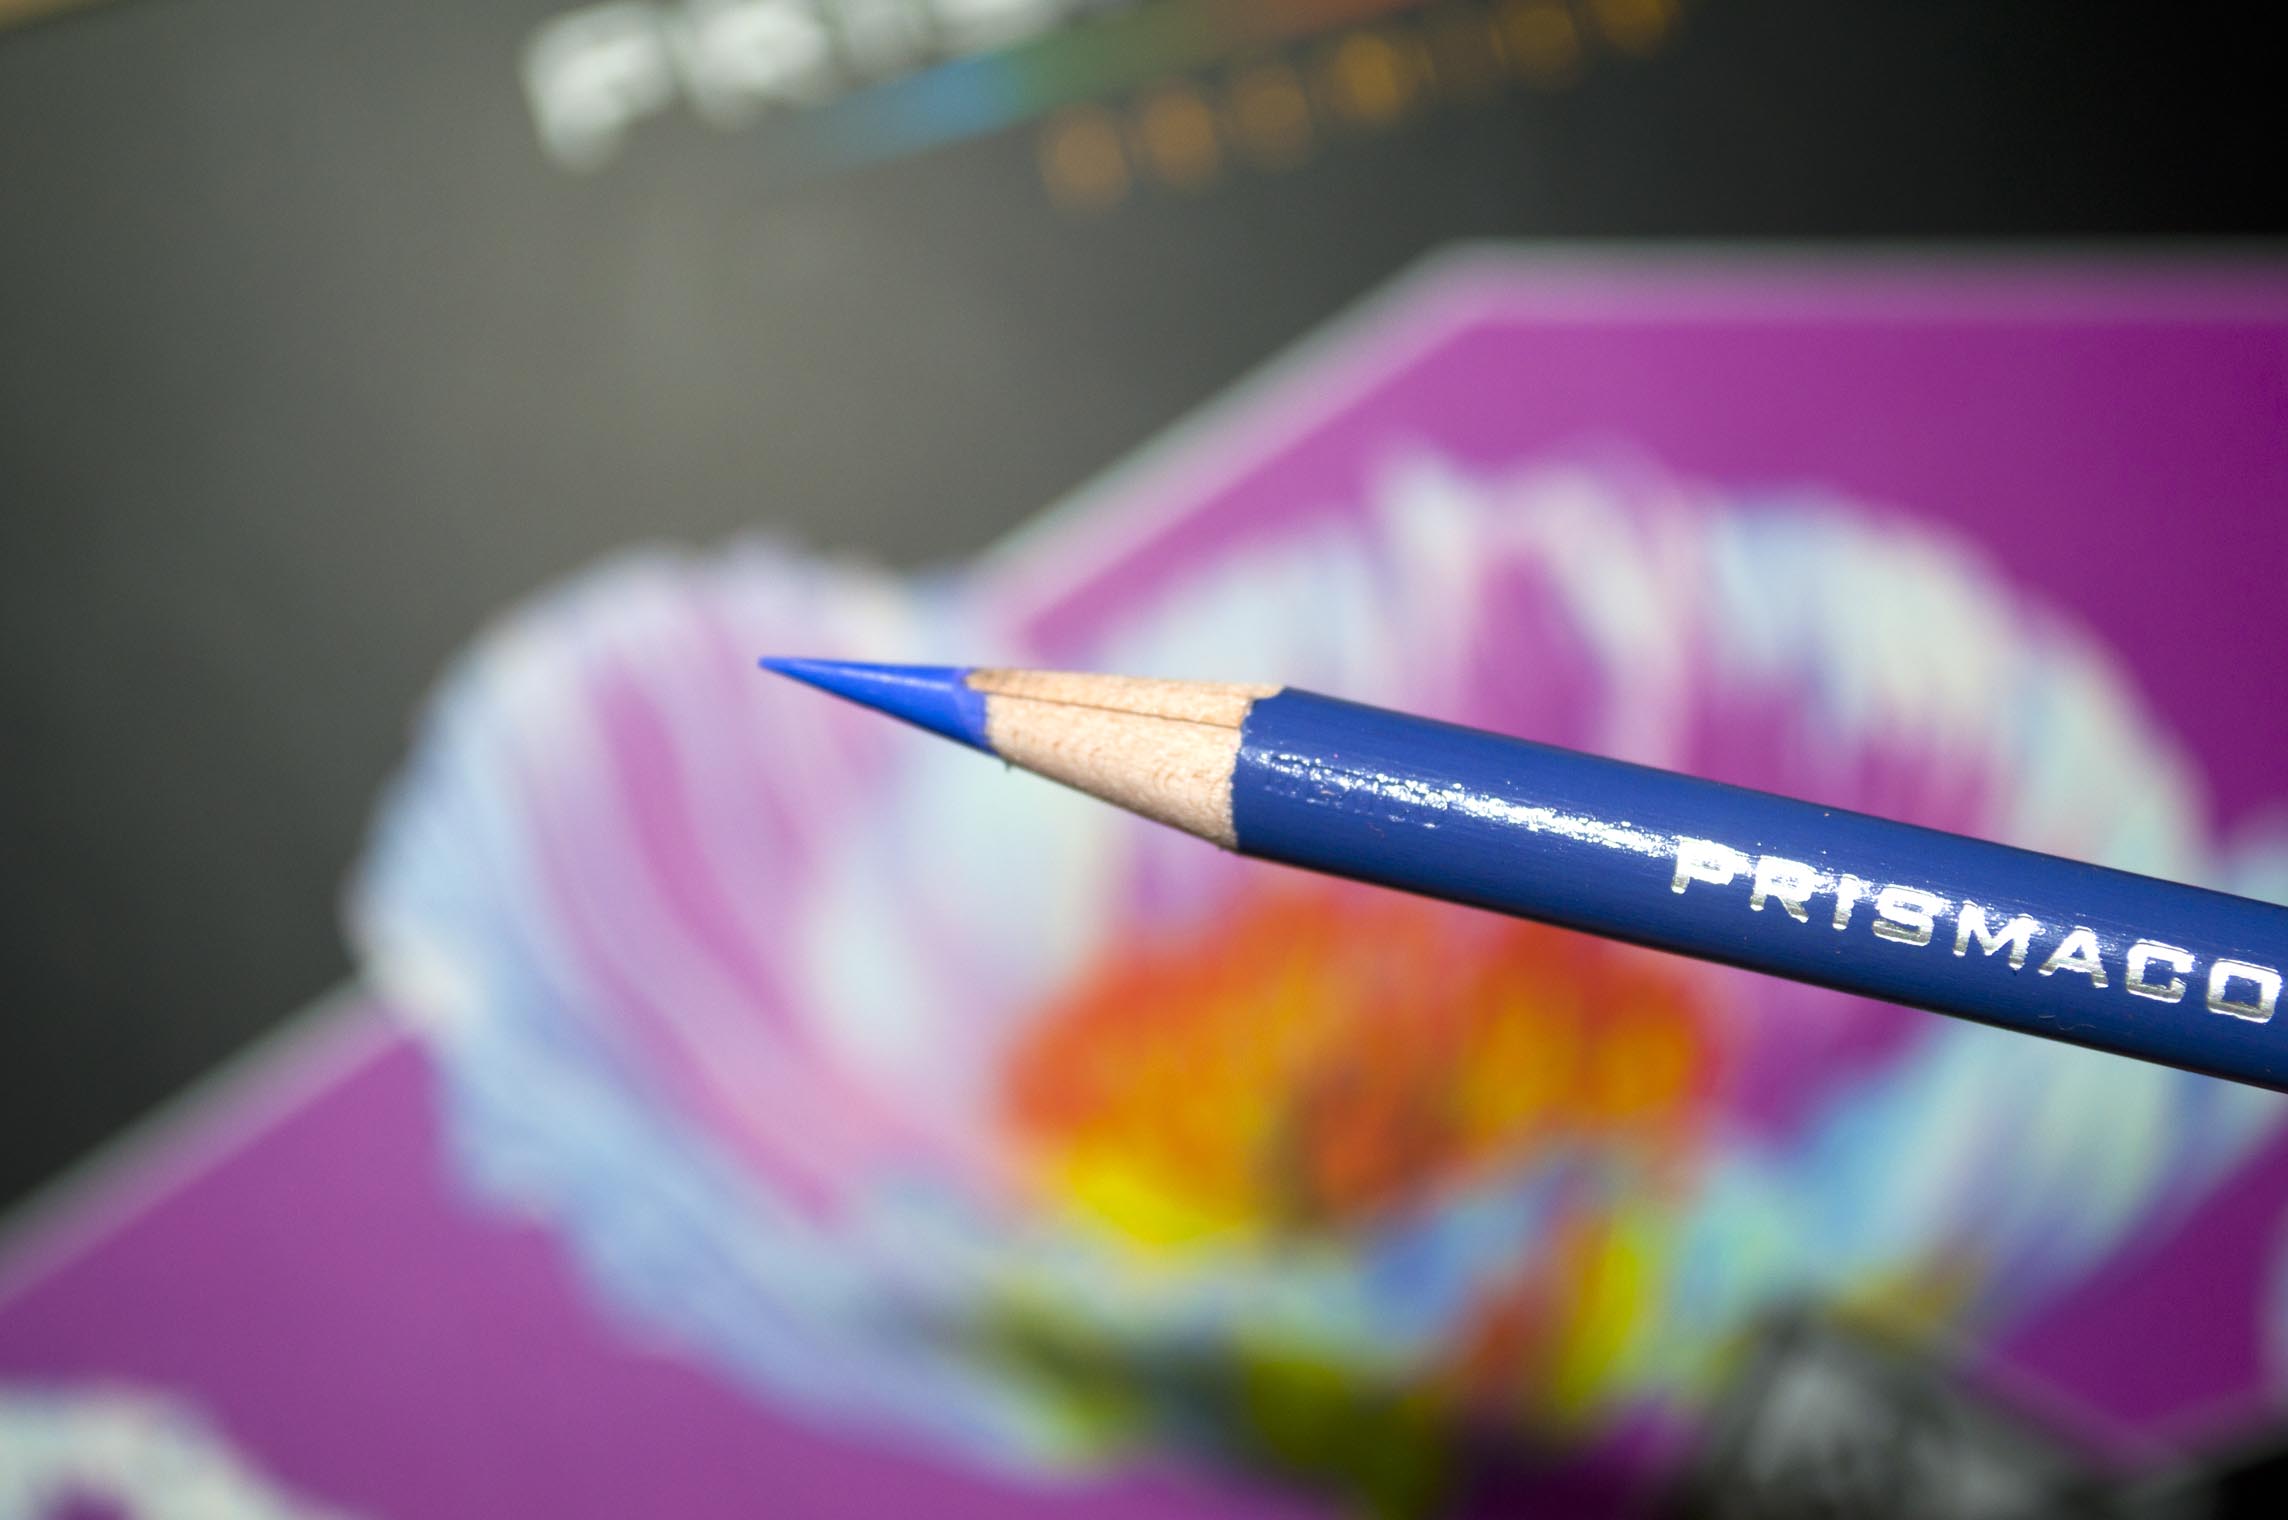 Prismacolor Markers • Art Supply Guide